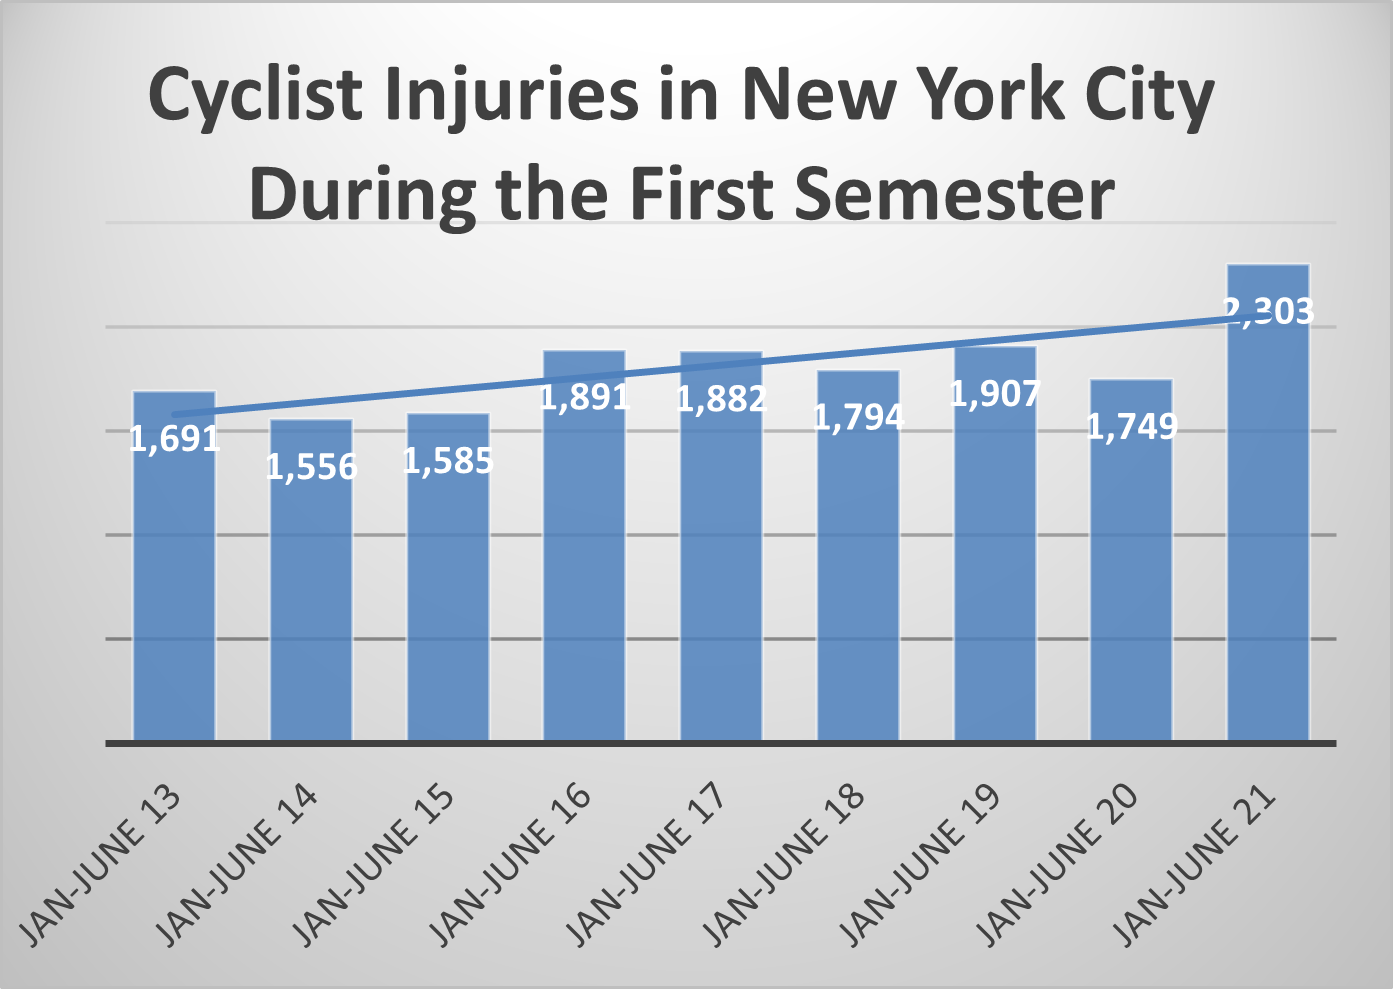 NYC bicycle accident injuries 1st sem 2021